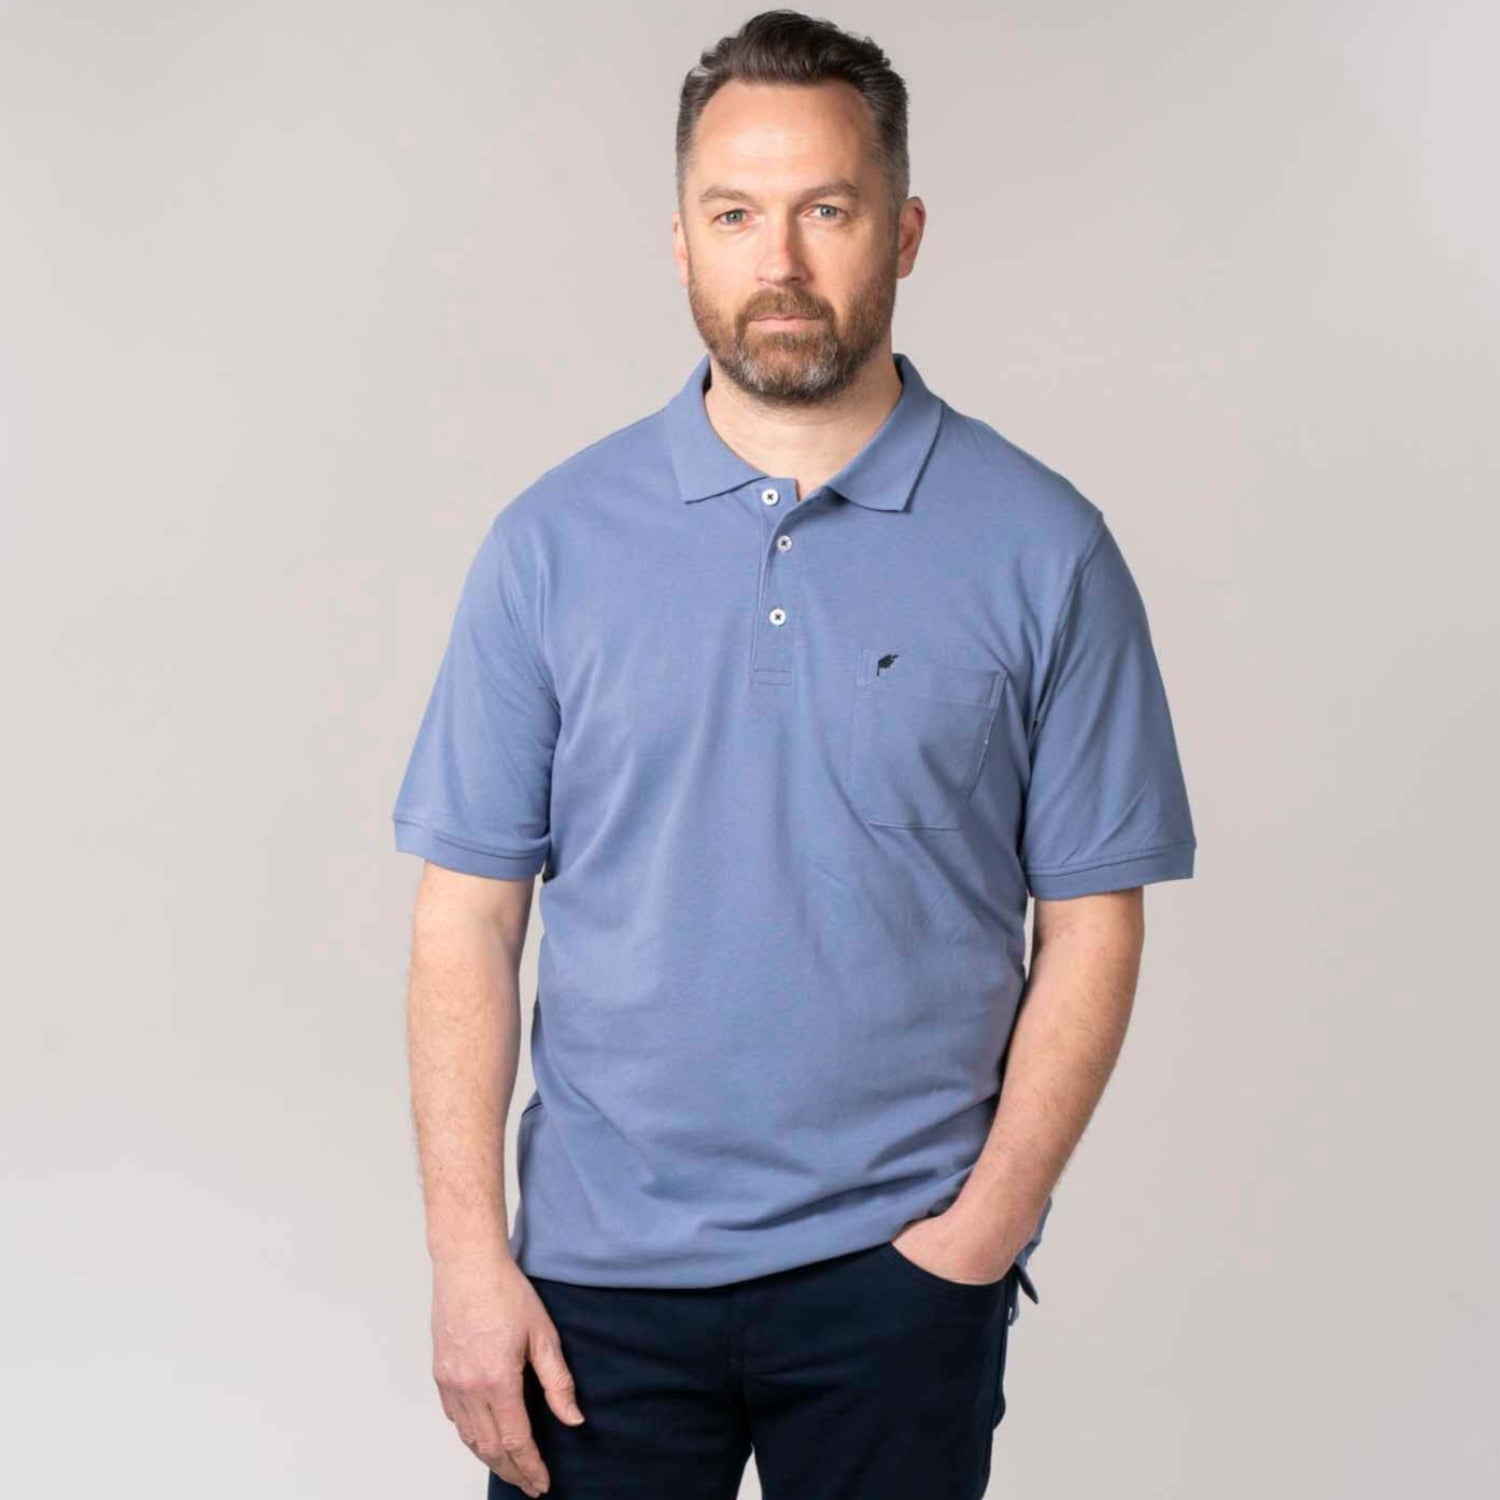 Yeats Niels Short-sleeve Polo - Colony Blue 1 Shaws Department Stores